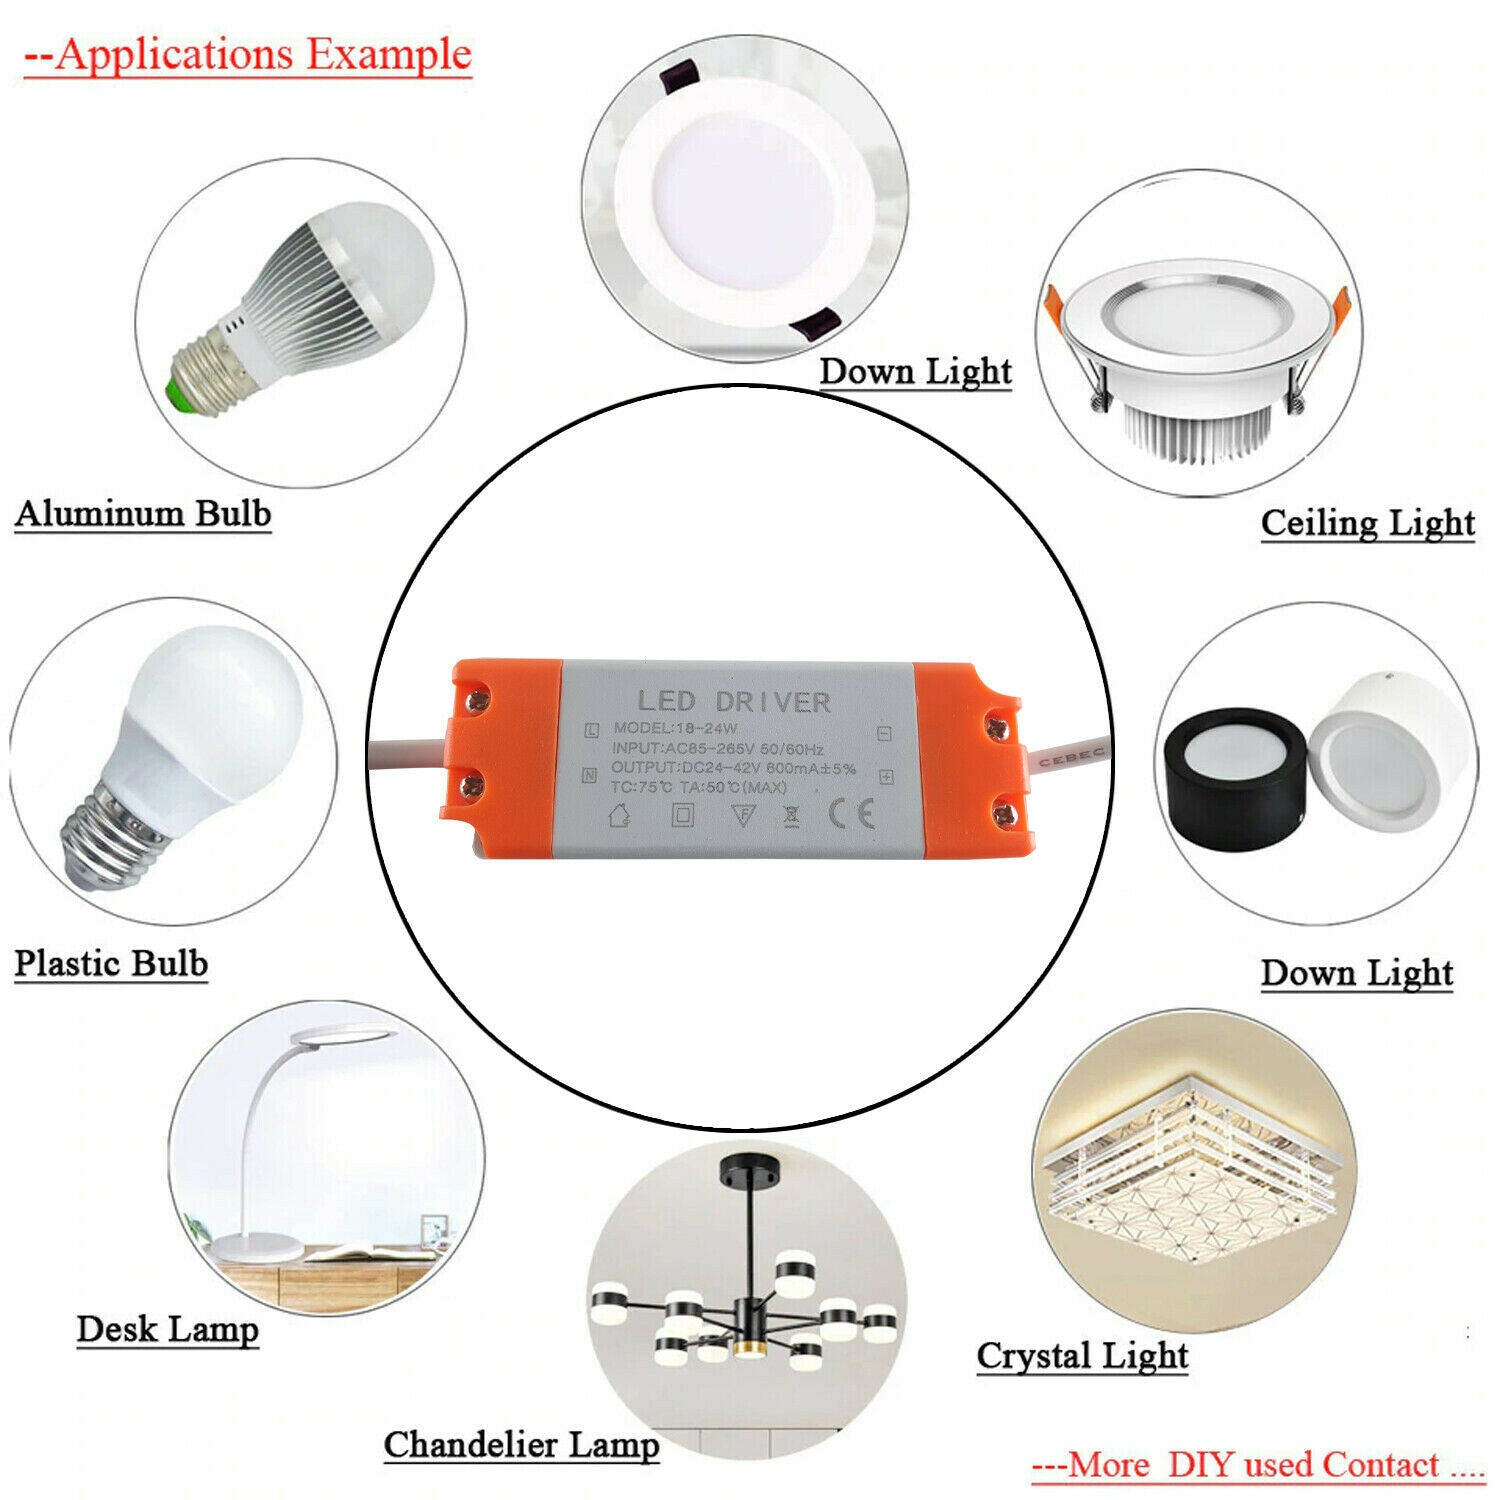 Application Examples of LED driver